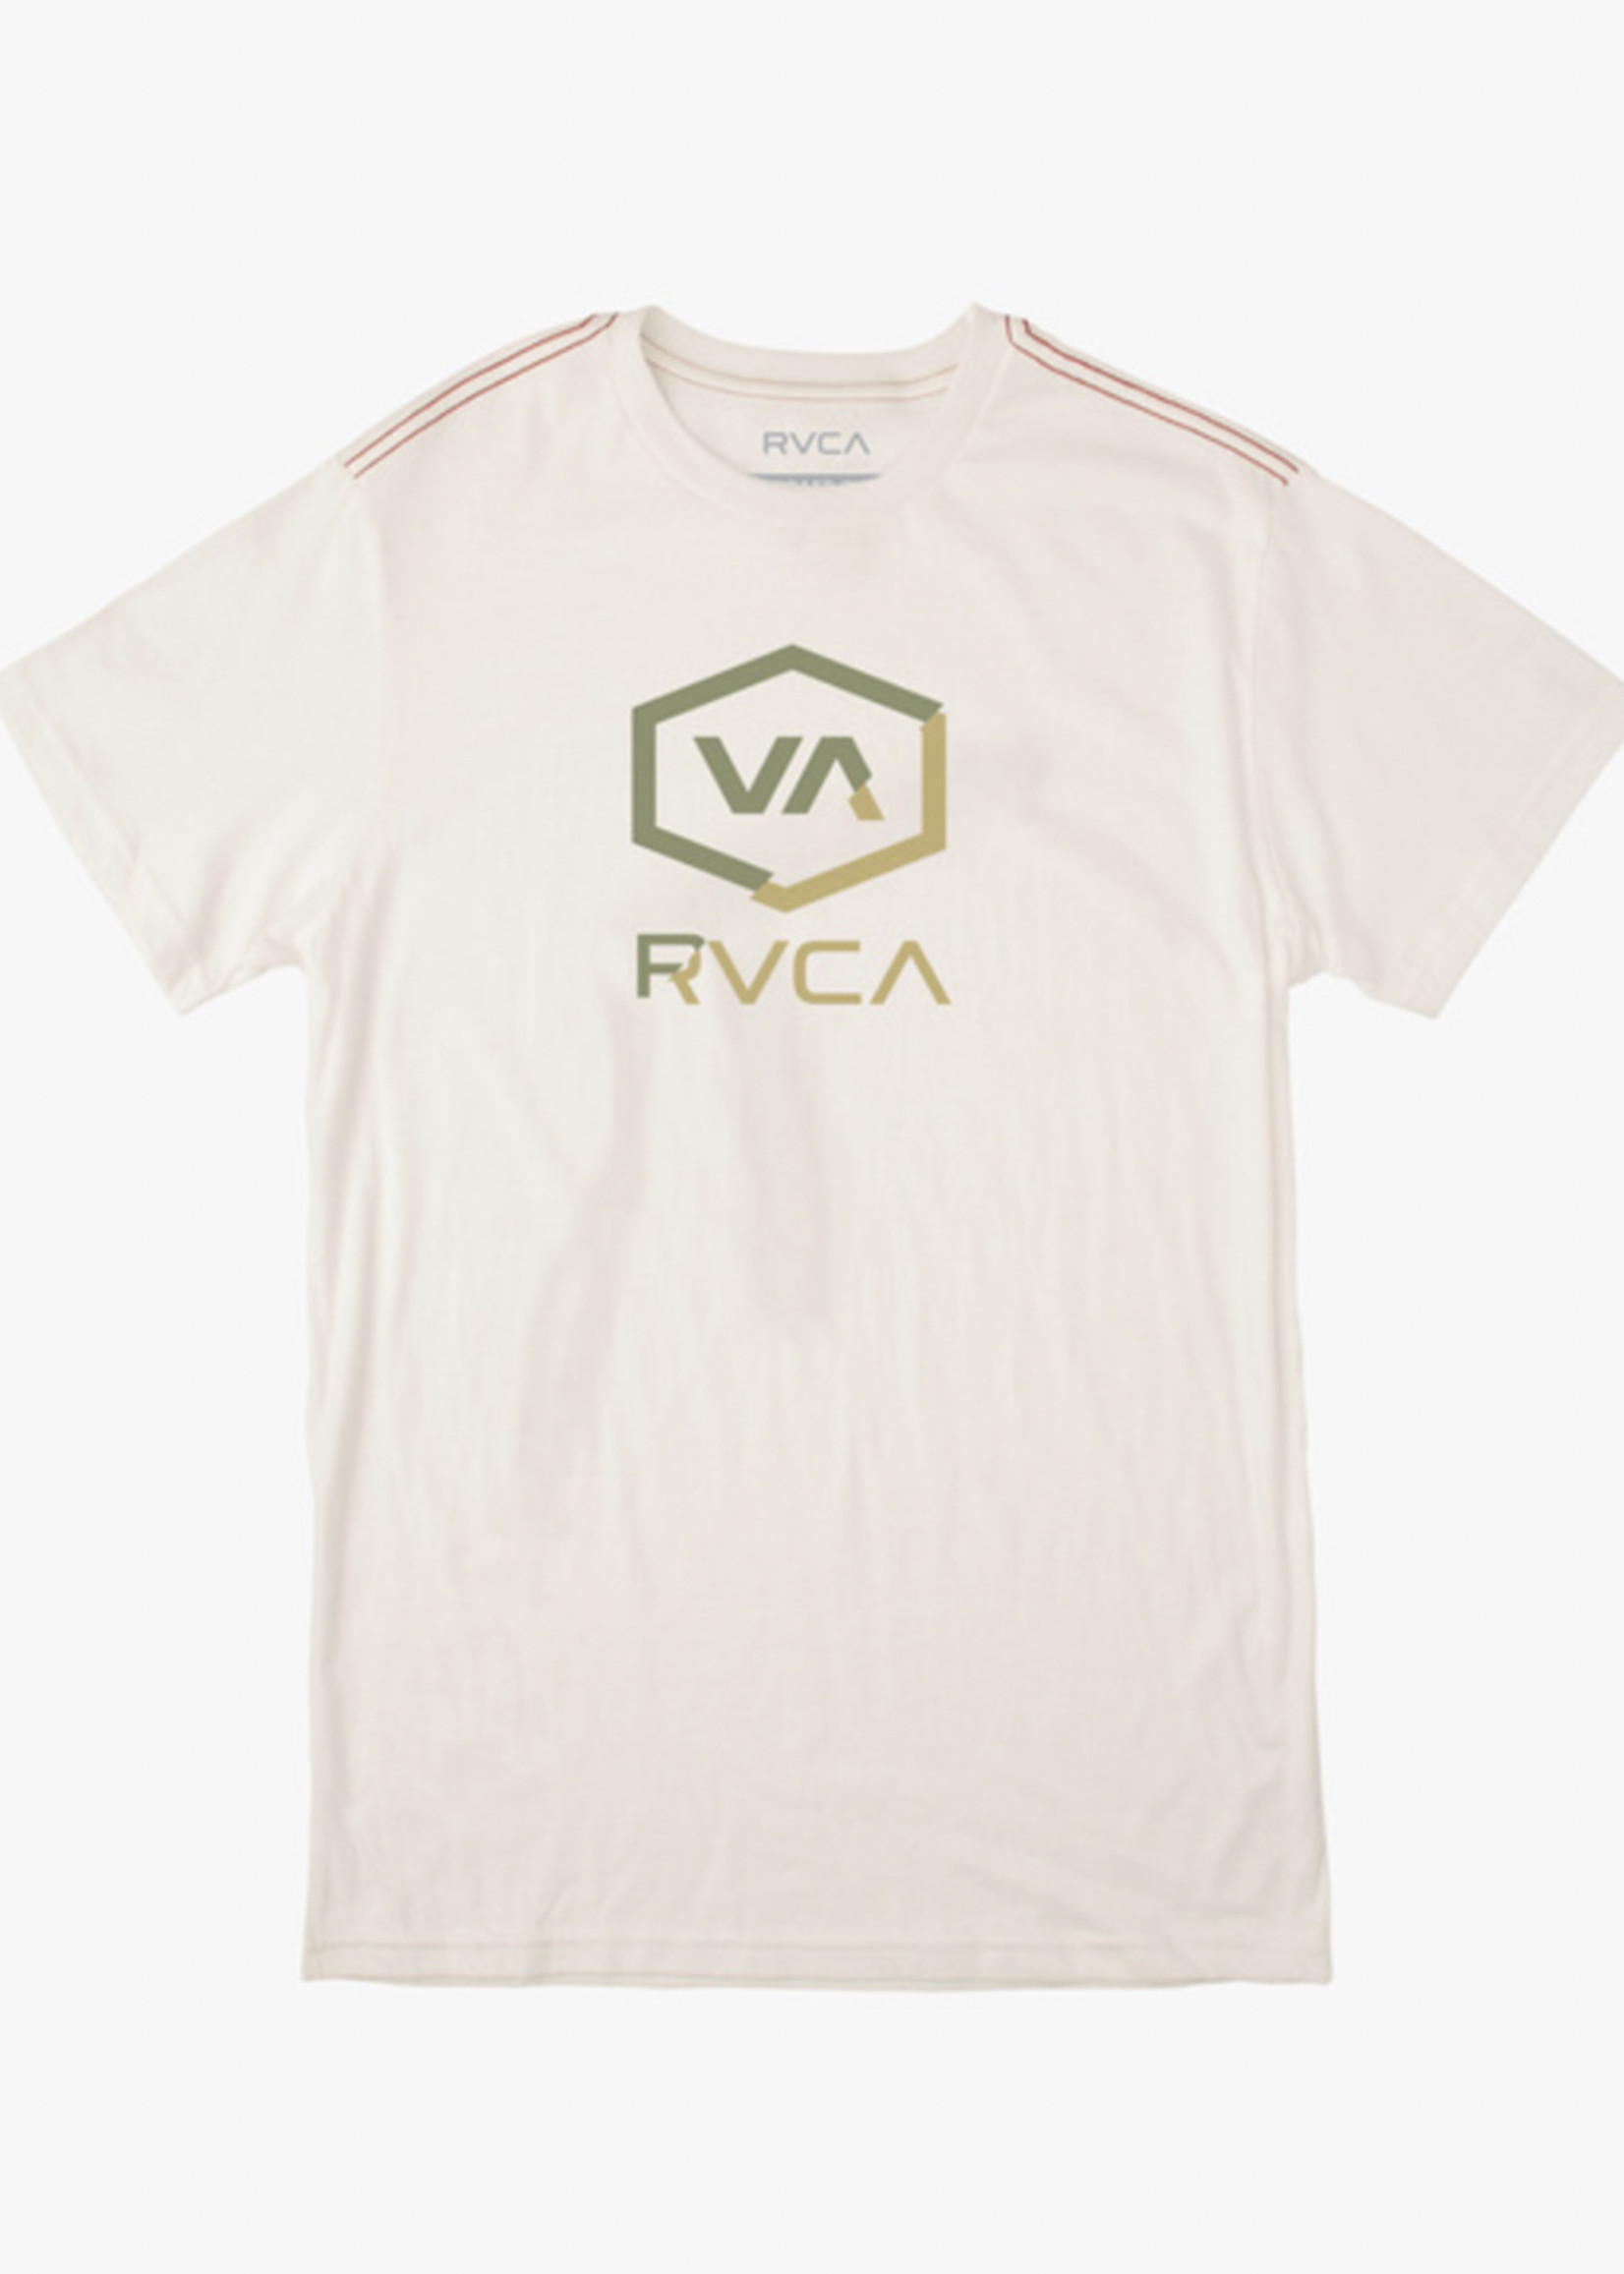 RVCA Shifted Tees - Antique White